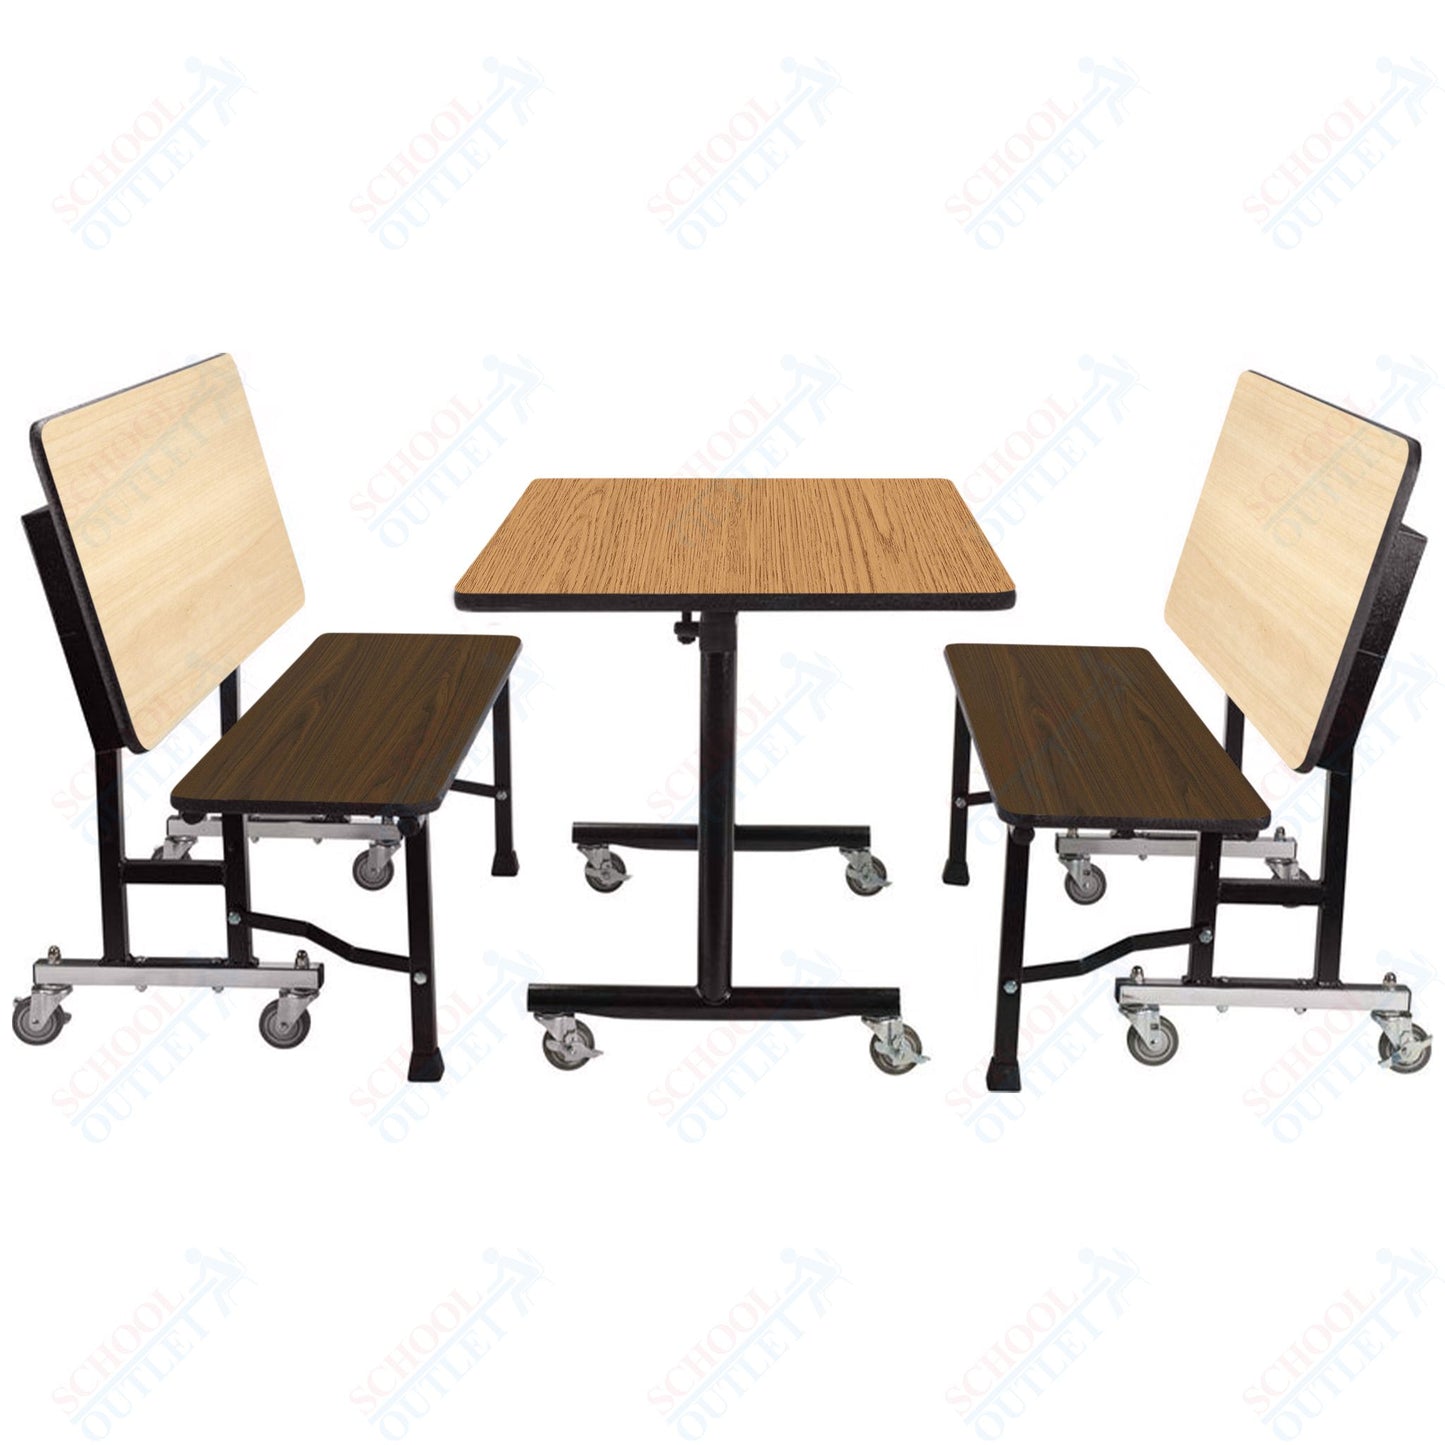 NPS ToGo Booth Set, (1) 30"x48" Table and (2) 48" Benches, MDF Core (National Public Seating NPS-TGBTH3048MDPE)